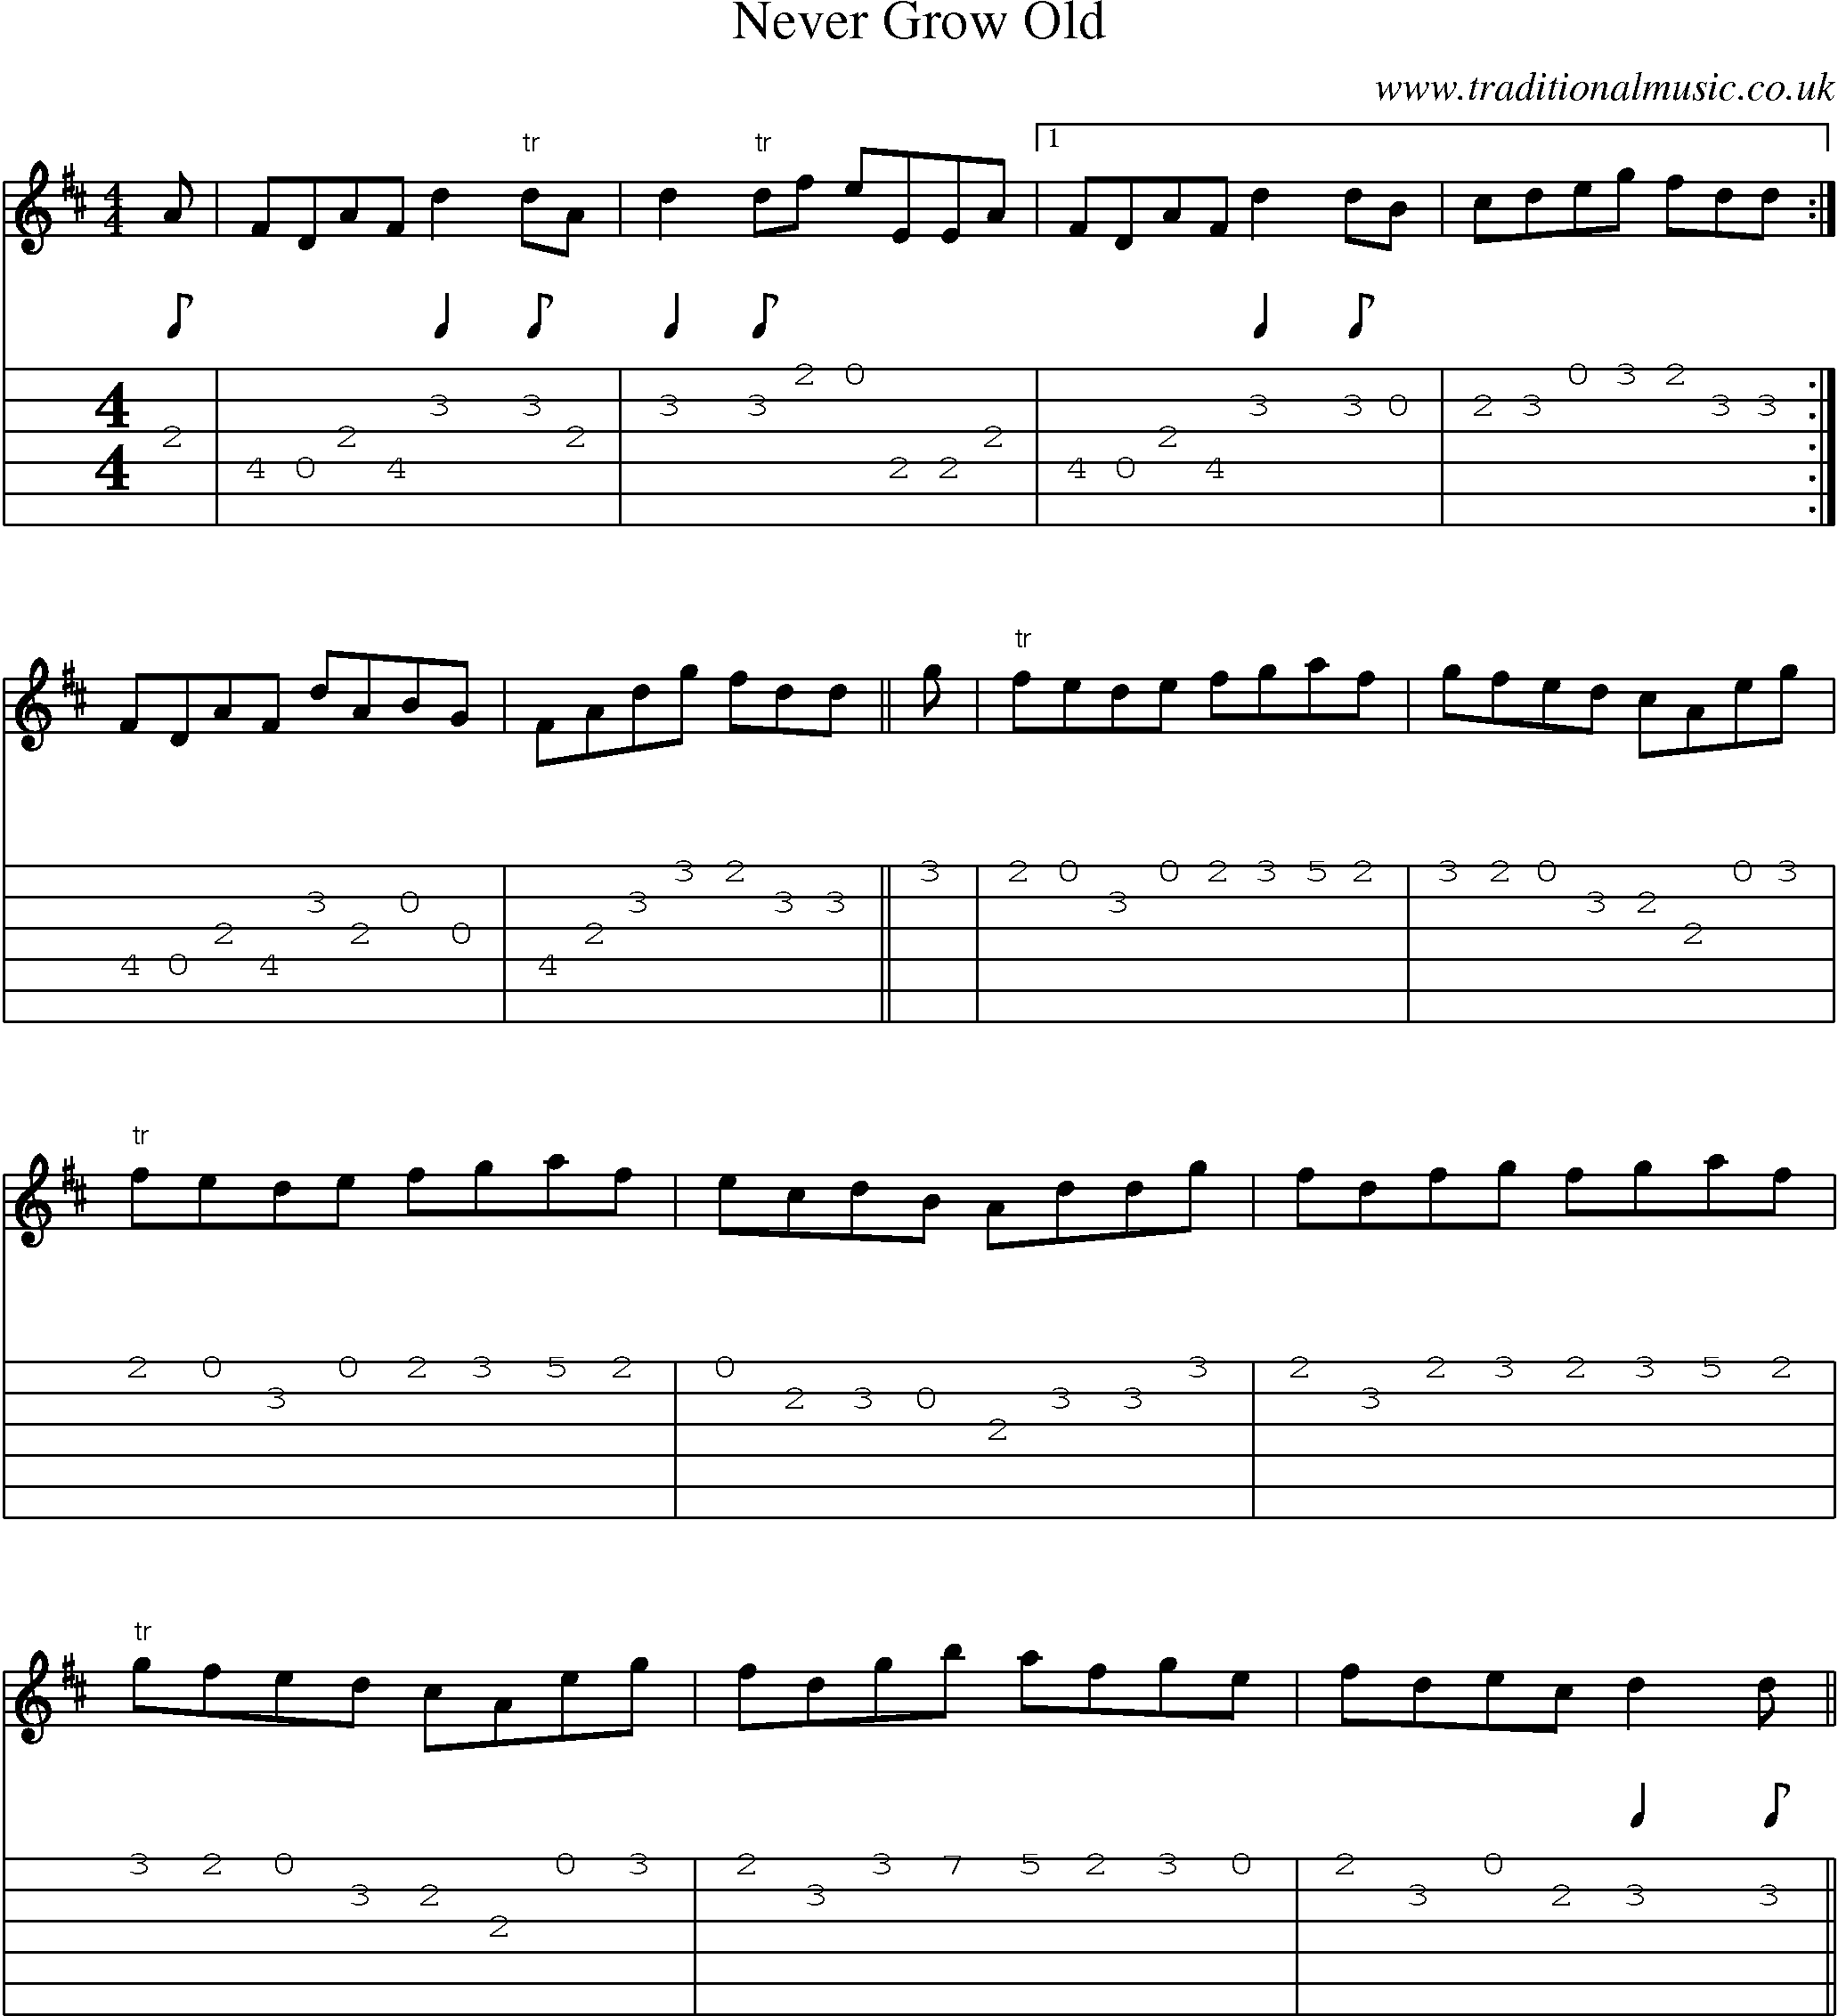 Music Score and Guitar Tabs for Never Grow Old